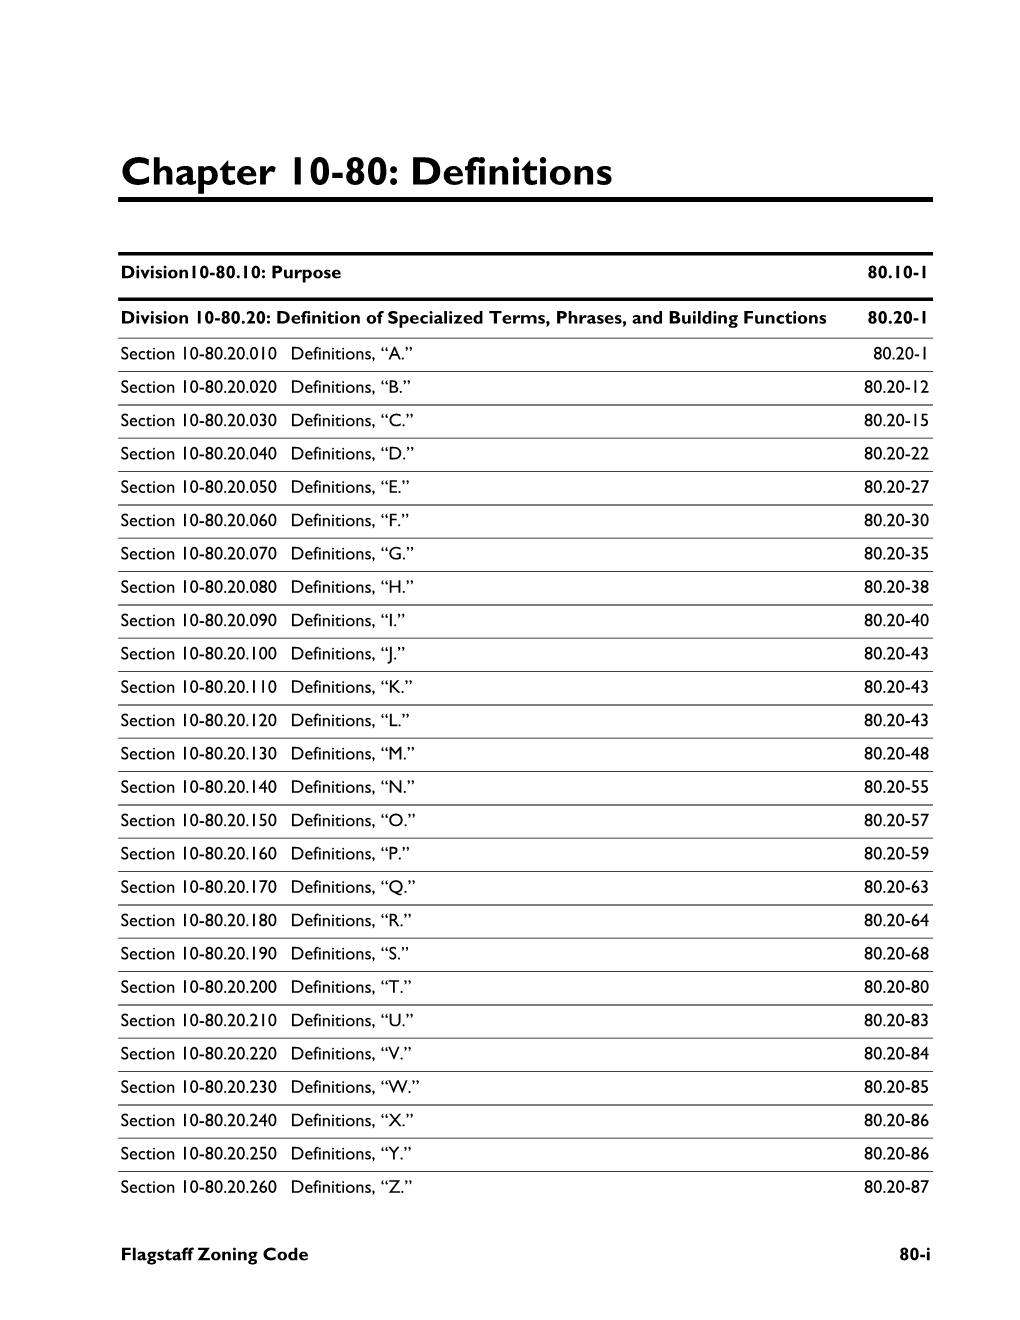 Chapter 10-80: Definitions